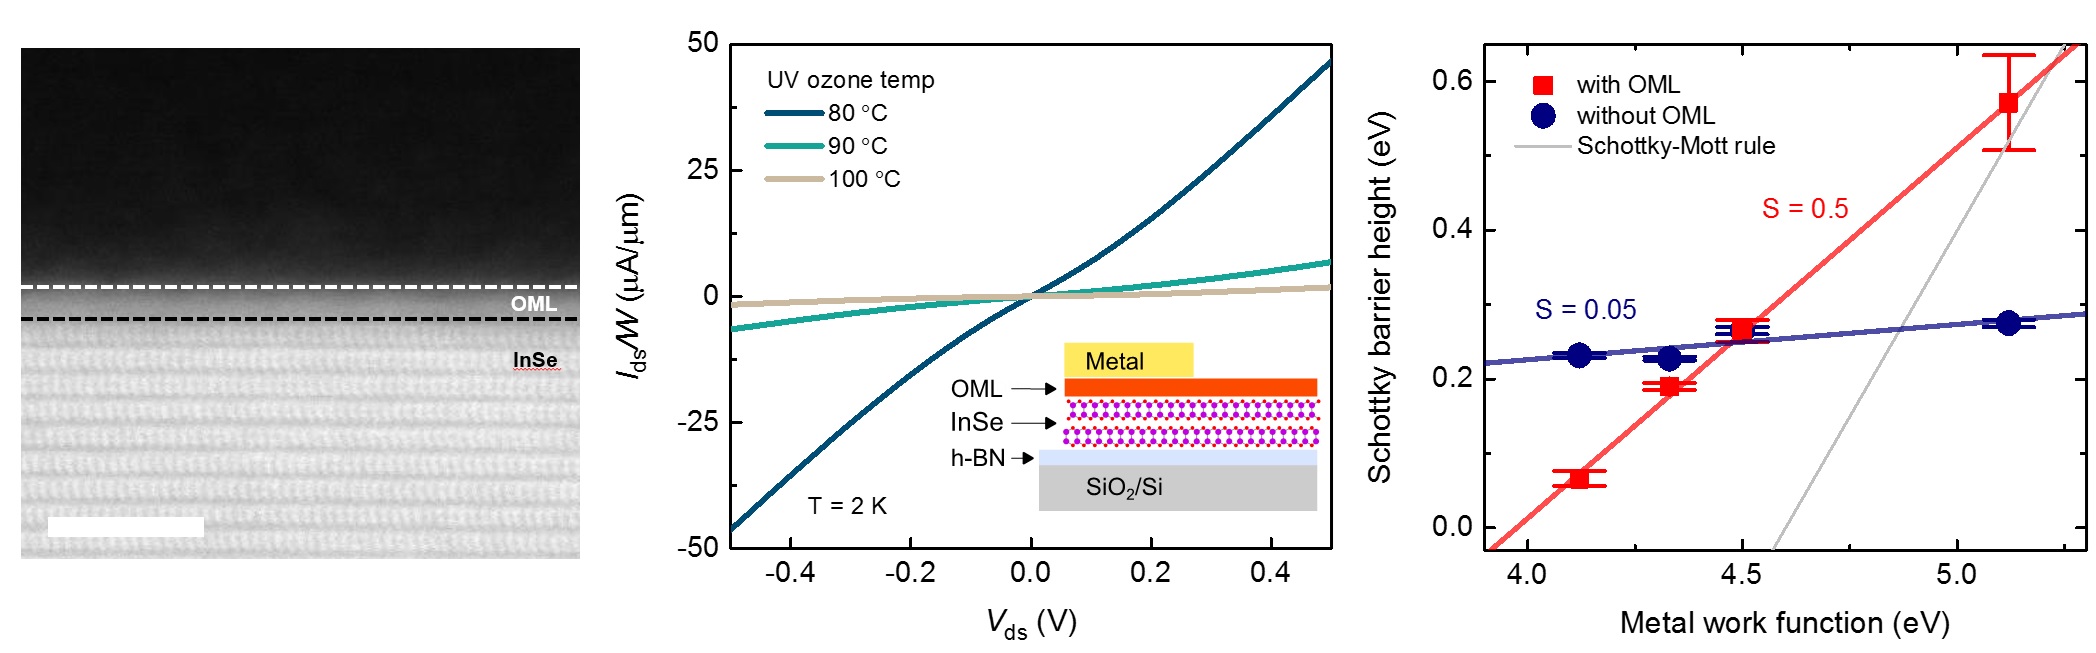 Oxidized-monolayer Tunneling Barrier for Strong Fermi-level Depinning in Layered InSe Transistors